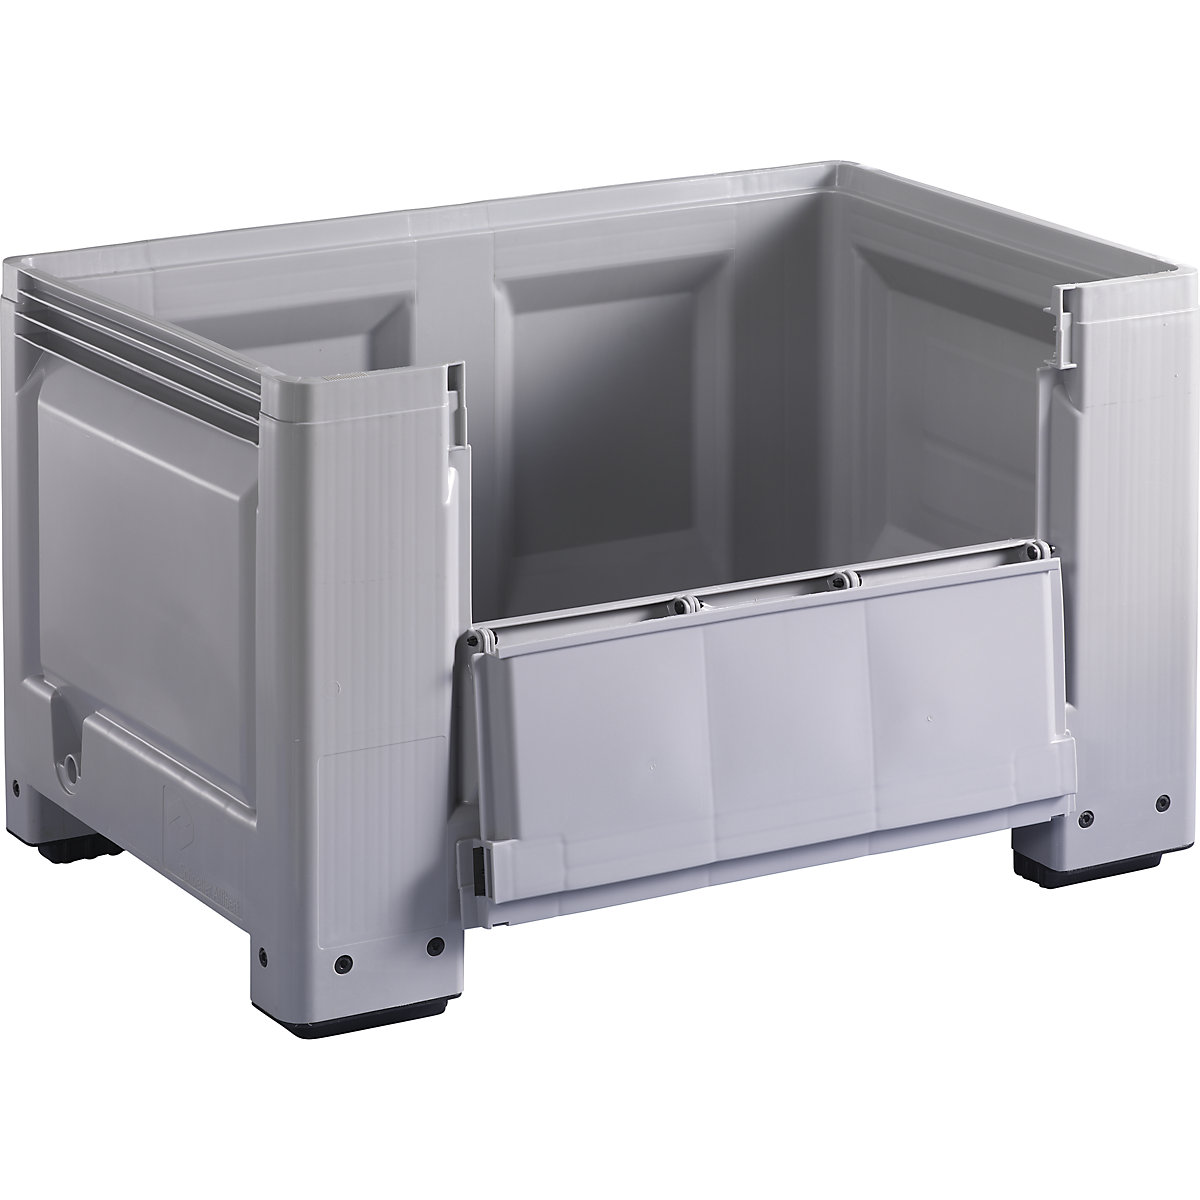 Pallet box, standard version, capacity 535 l, model with 4 feet, 1 side flap, 6+ items-4